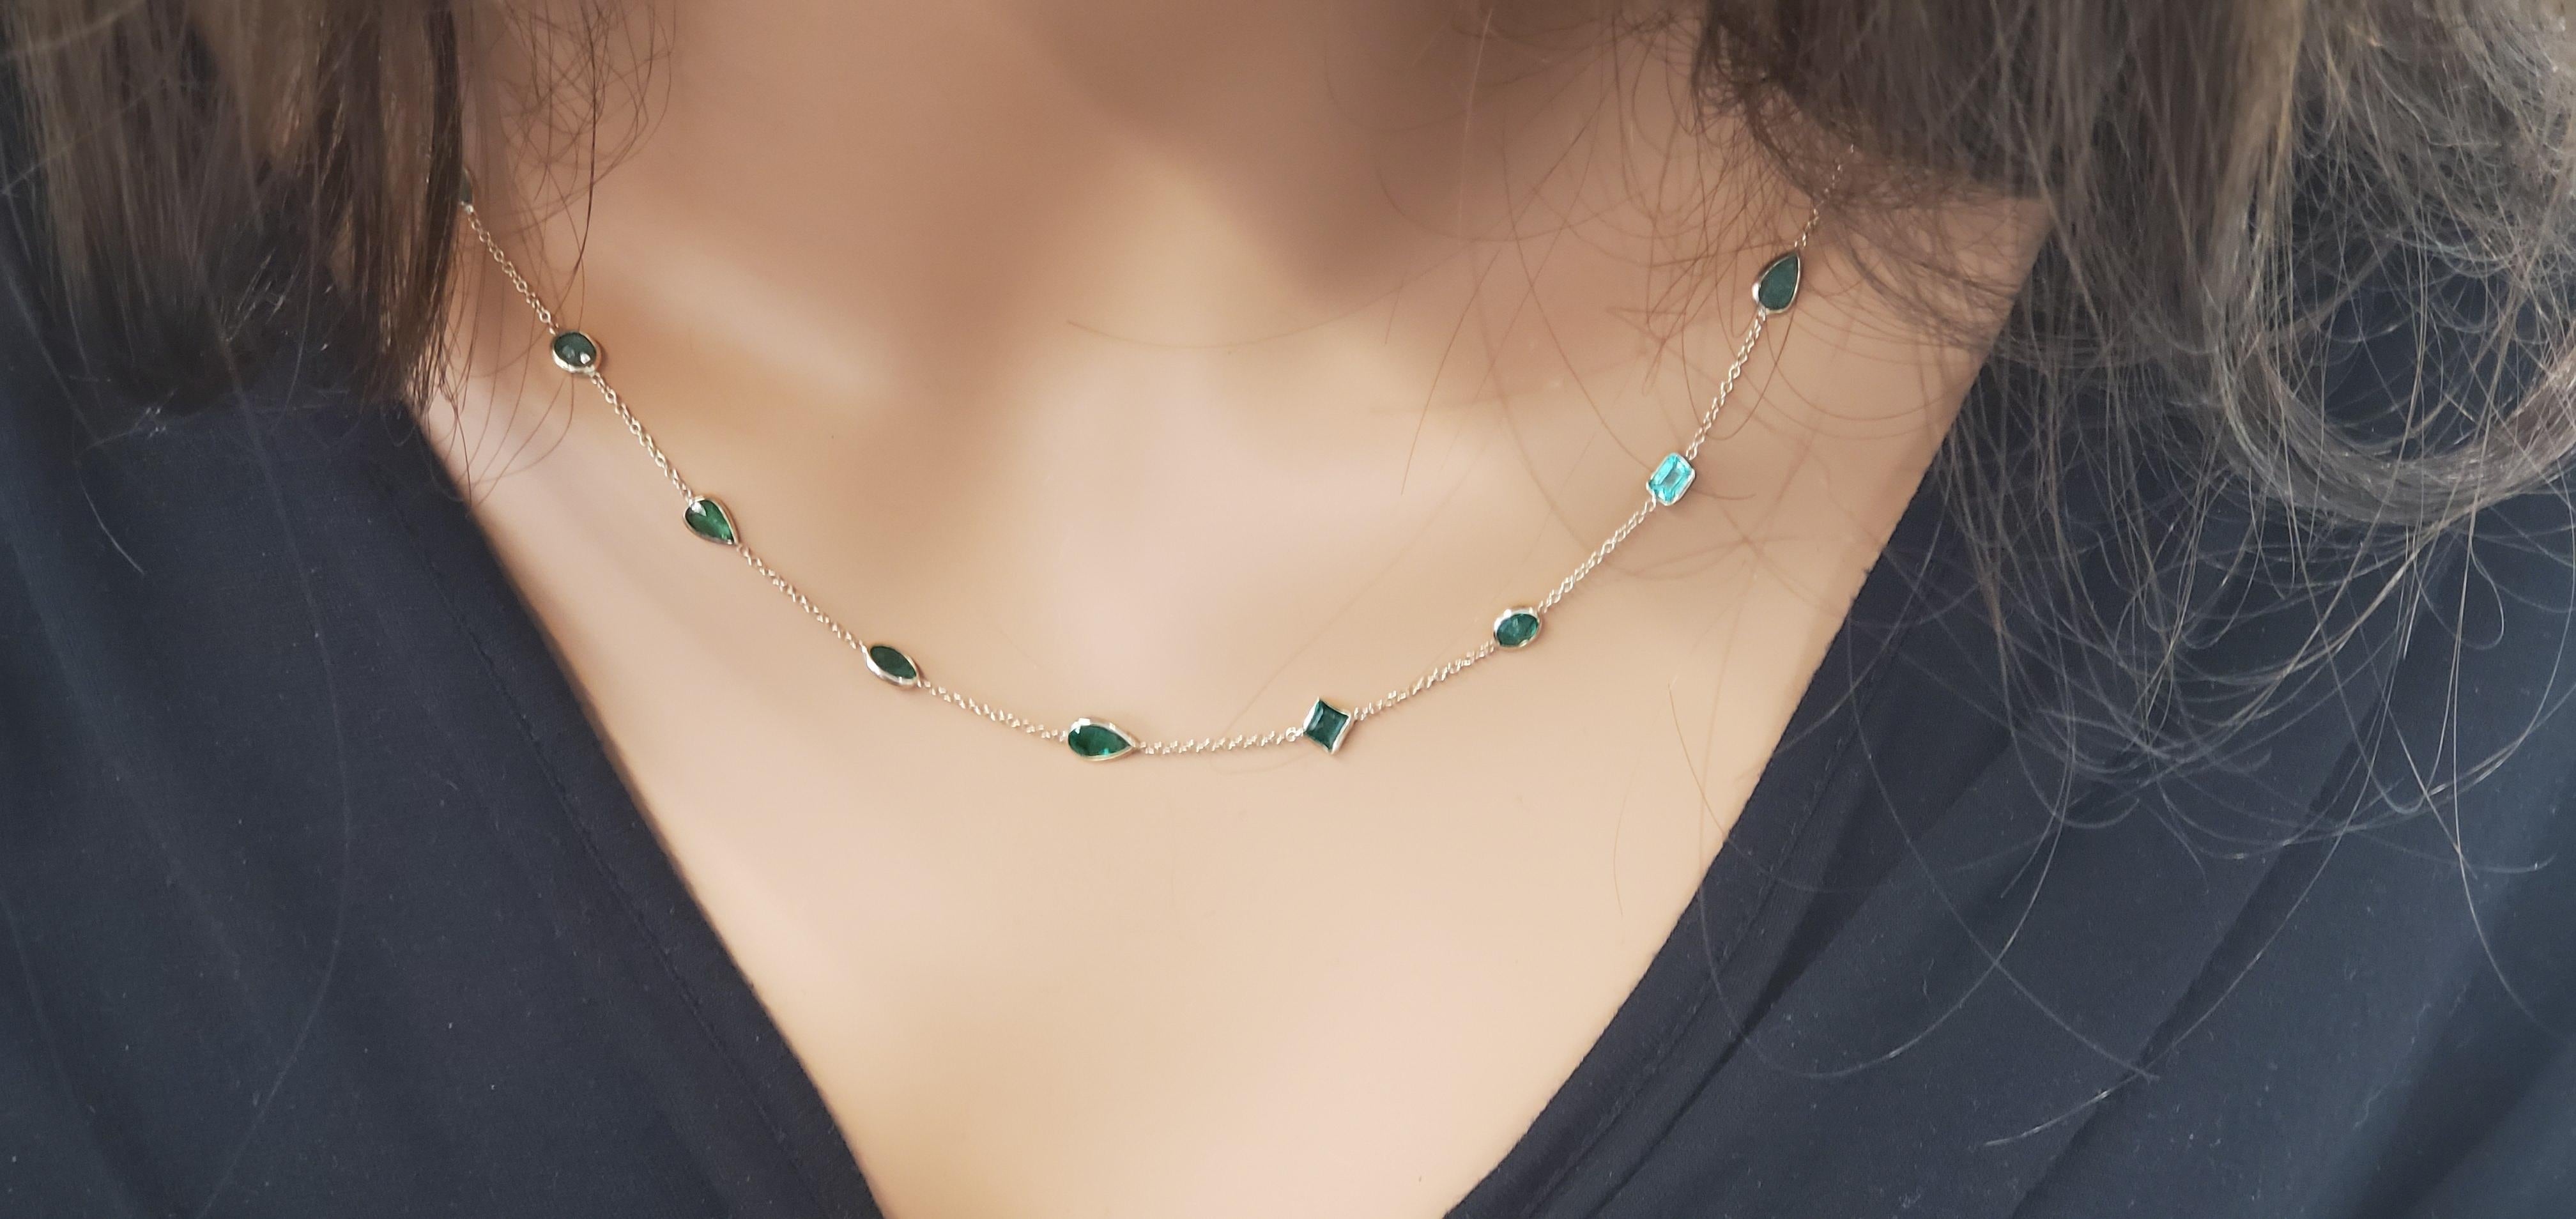 Chic style meets timeless elegance with this brightly polished 14k yellow gold necklace. This whimsical necklace features a total of 34 vibrant emeralds prong set on delicate links giving an effortless look of luxury. This pretty long-length